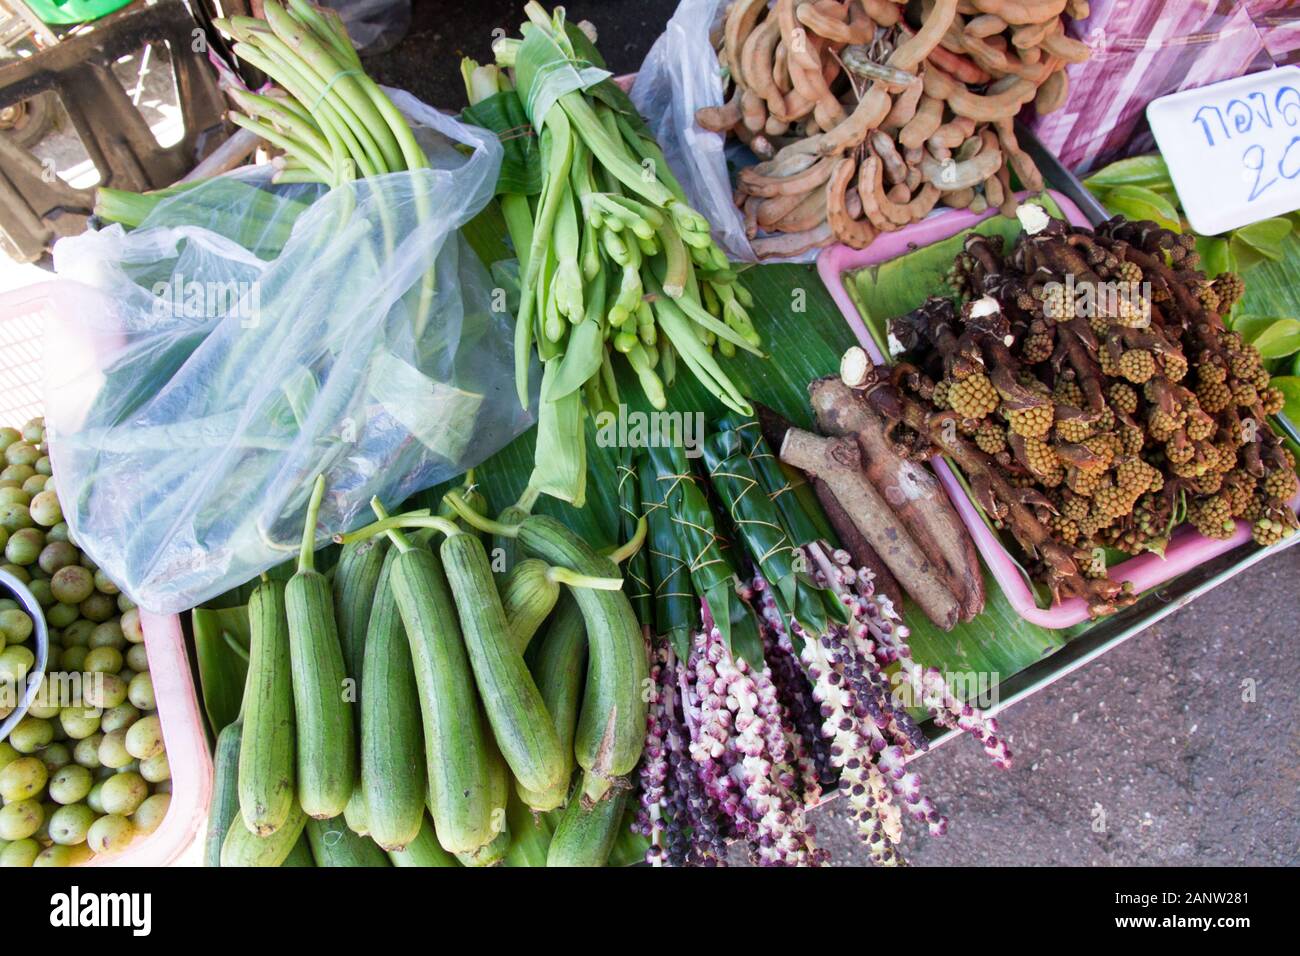 Vegetables for sale in stall Chiang Mai , Thailand Stock Photo